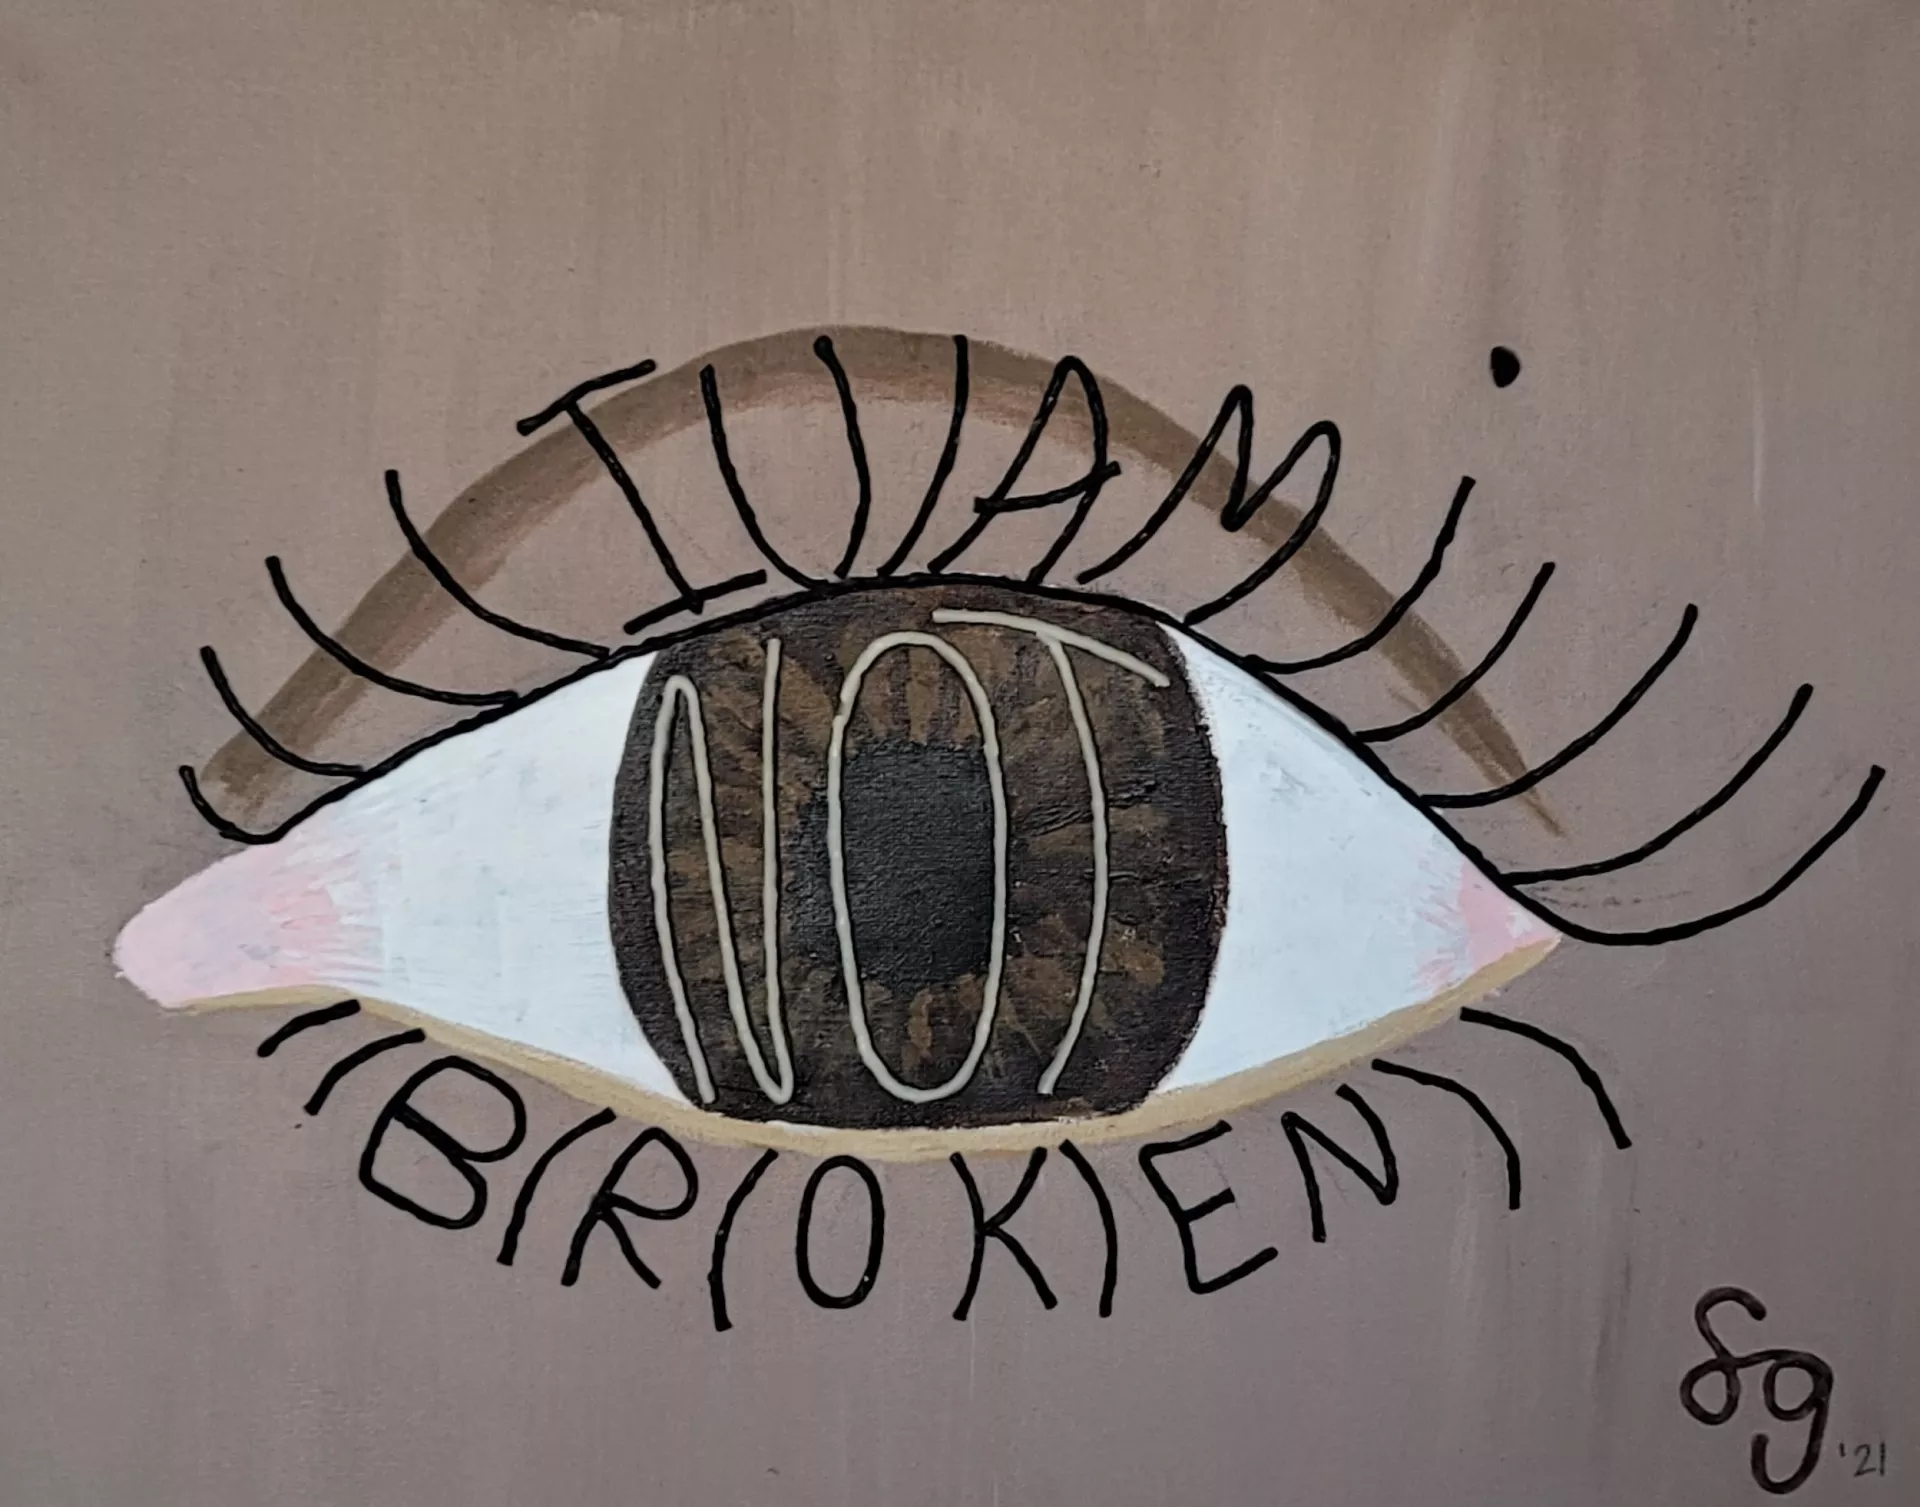 The painting depicts a human eye closely cropped into the center of the canvas with a light brown flesh tone surrounding it; the iris is a darker brown with a black pupil in the center; across the iris and pupil is the word "NOT" in light off-white-colored Wikki-Stix. In the upper eyelid, there are black eyelashes, and worked into the eyelashes are the words " I AM" so that they appear like letters made of eyelashes. In the lower eyelid's black eyelashes is the word "BROKEN".